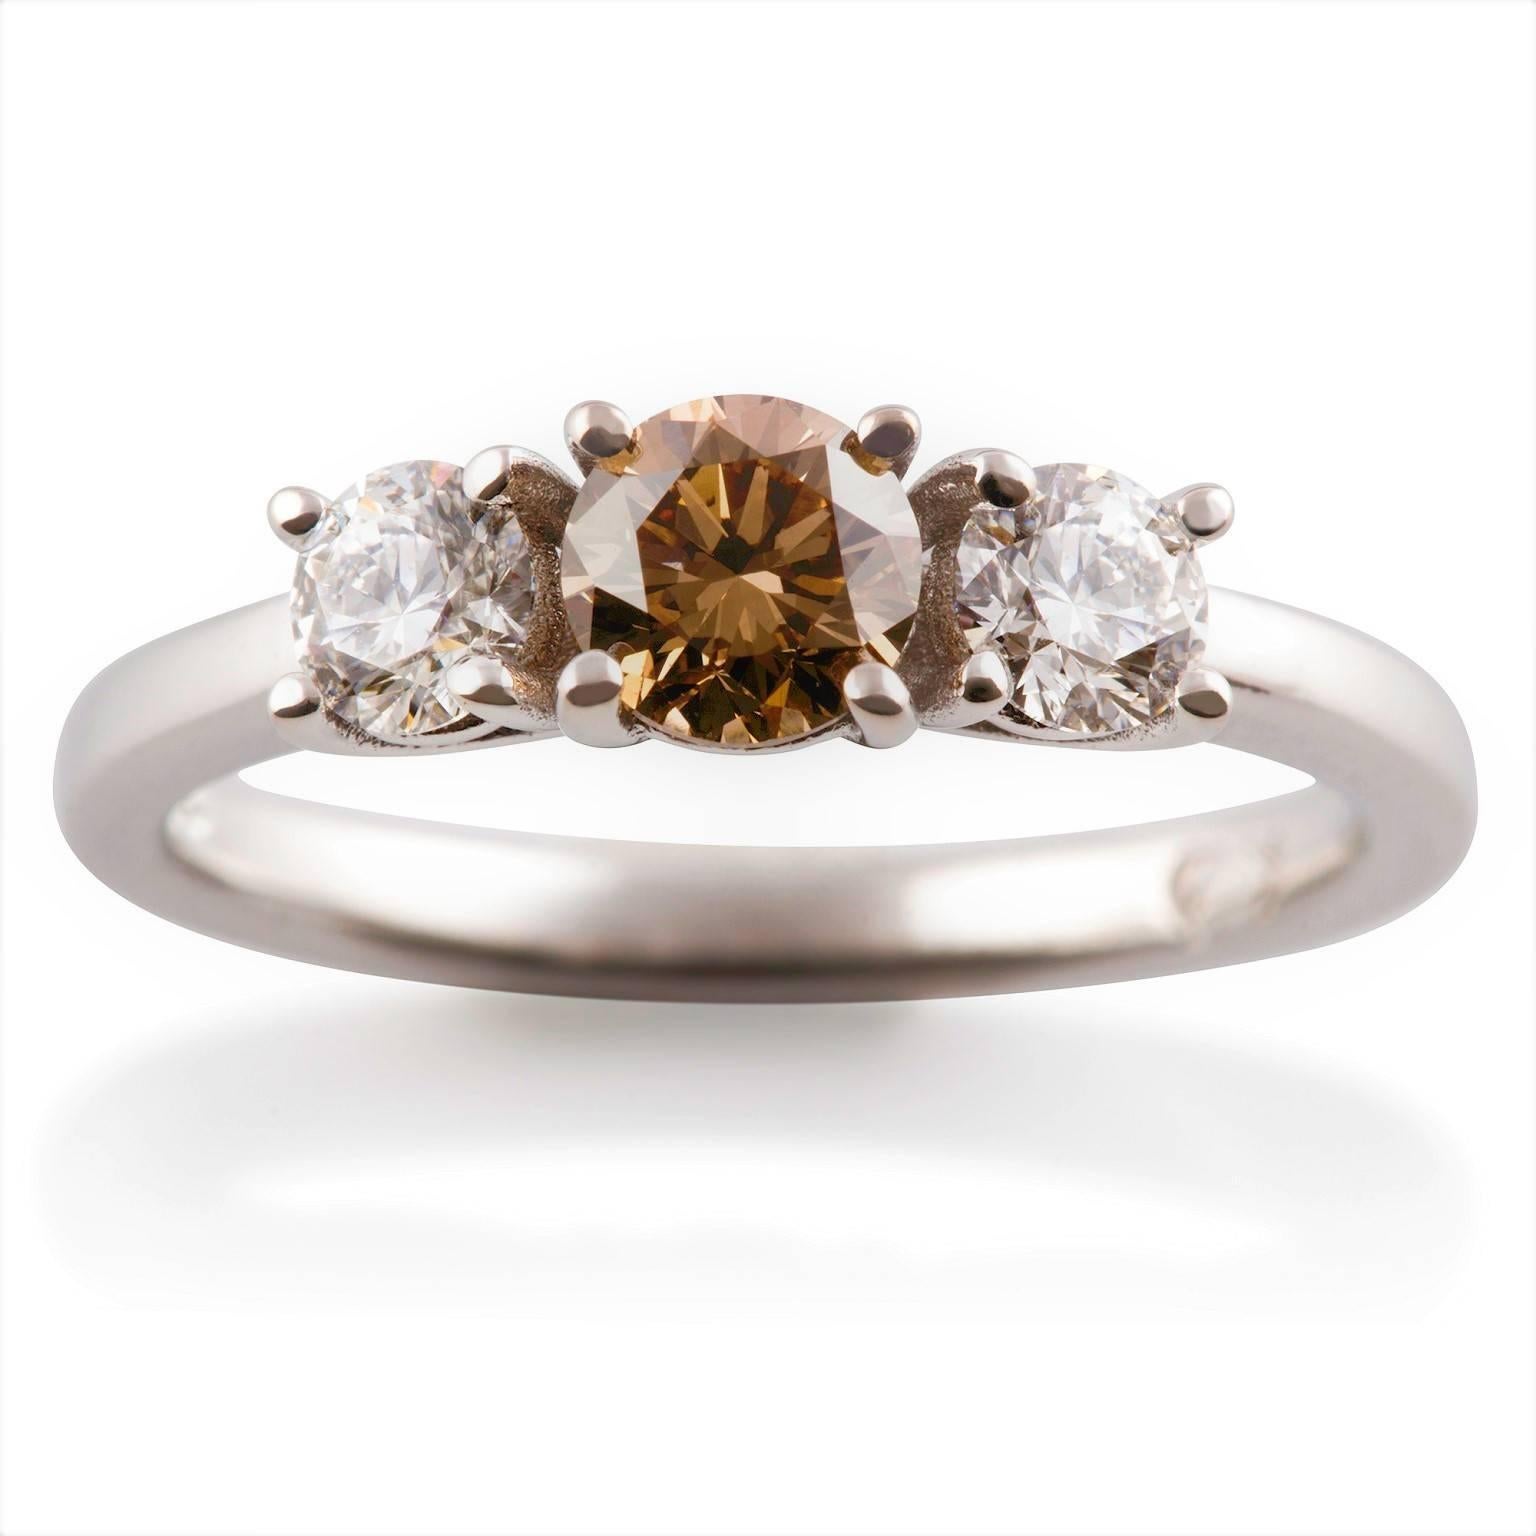 Cognac  & Ice Ring

Beautiful and understated, this ring is set with an attractive Argyle cognac diamond with a finest white diamond on either side.

1  x Round brilliant cut diamond: Cognac colour, VS clarity, 0.52 carat total weight

2 x Round